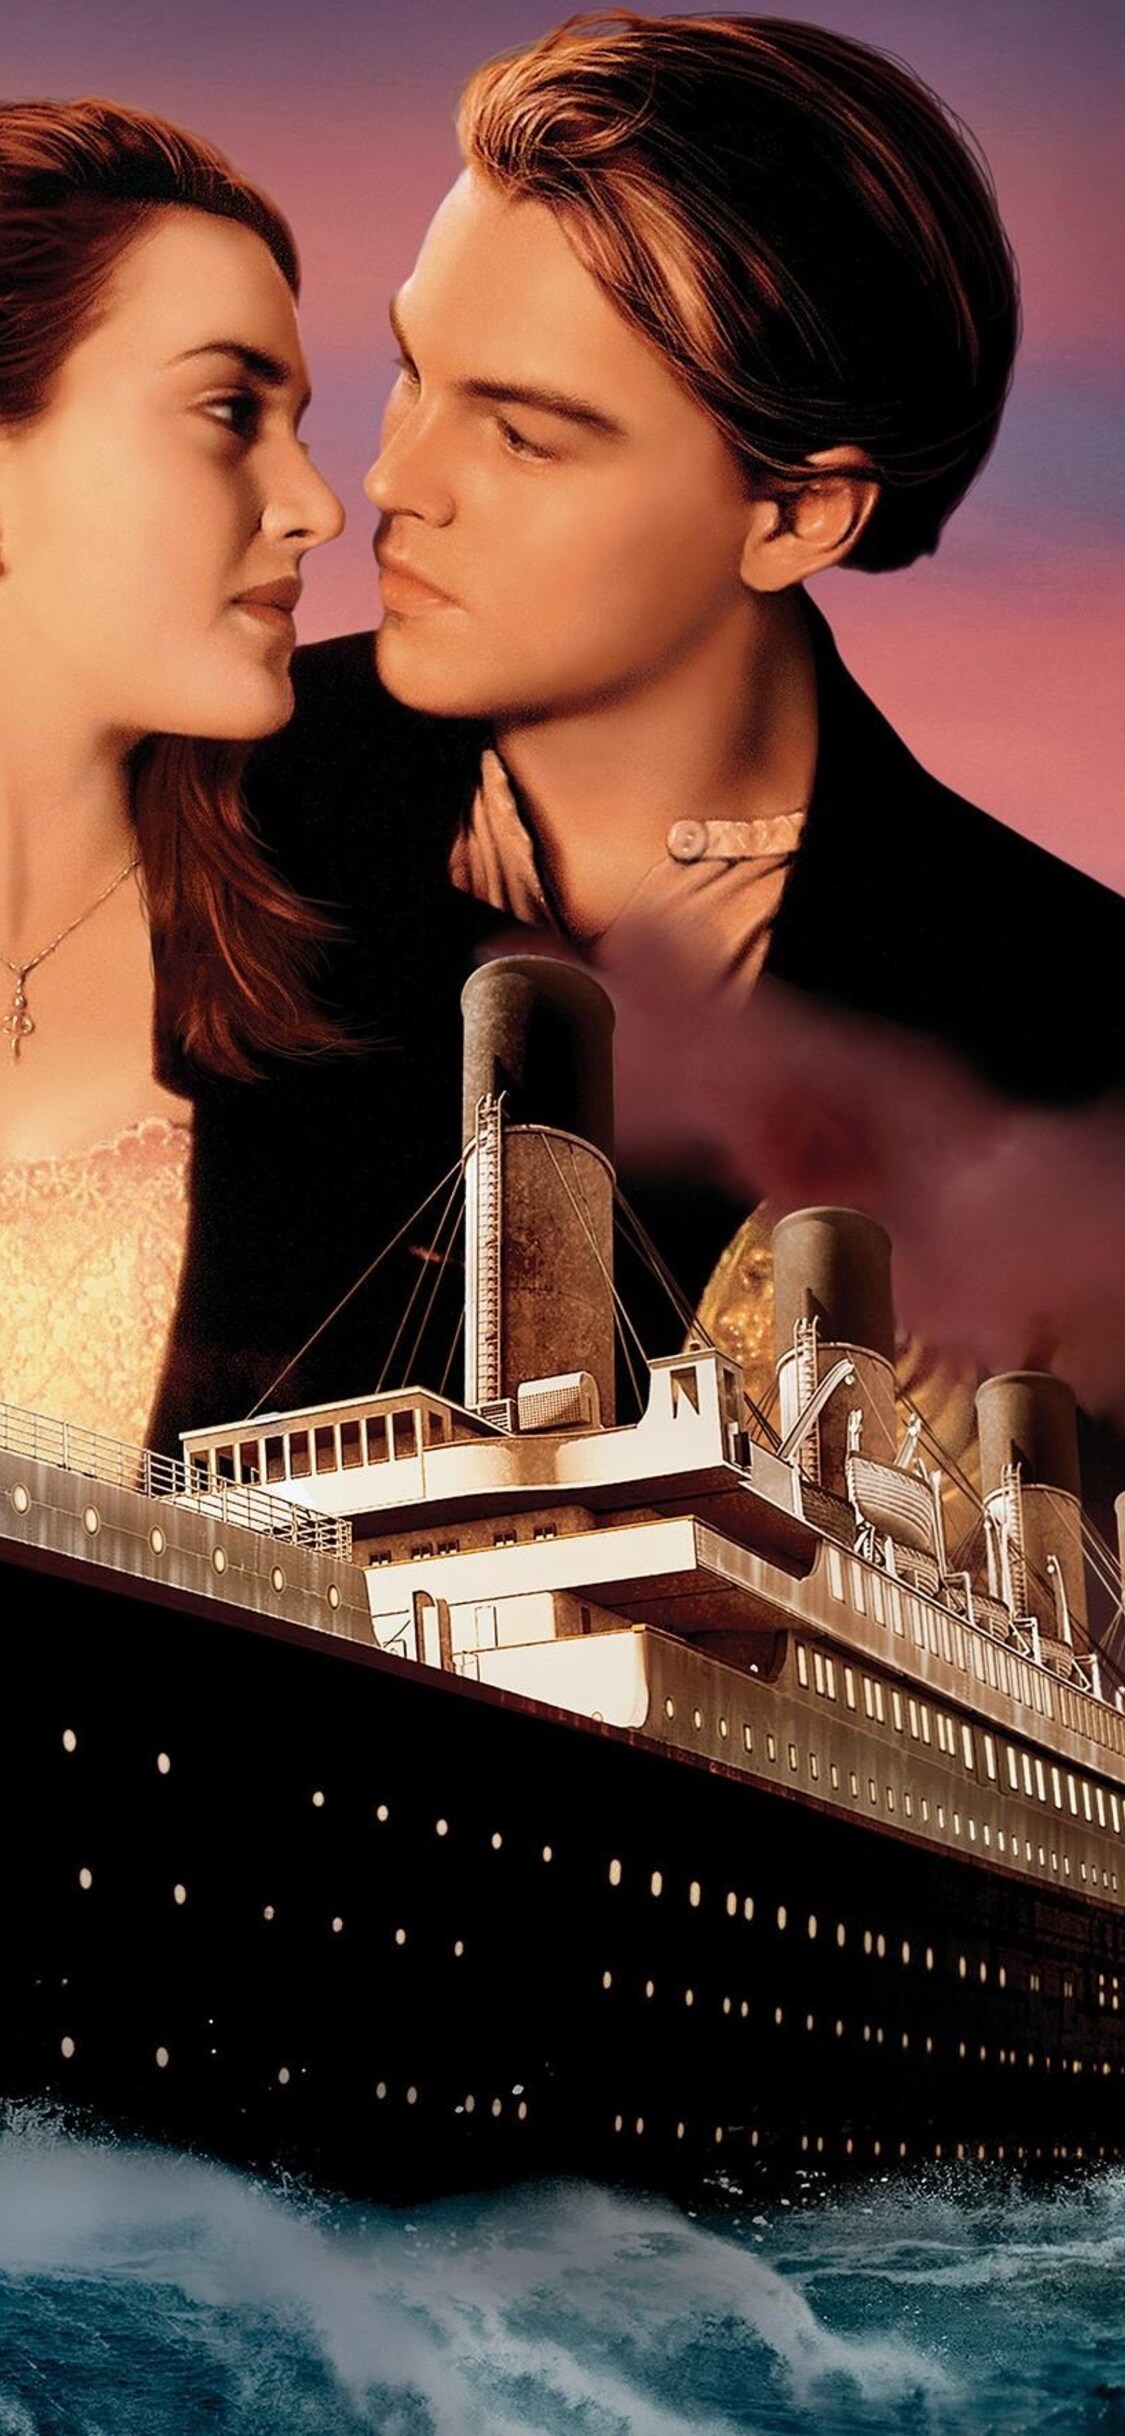 X titanic movie full hd iphone xsiphone iphone x hd k wallpapers images backgrounds photos and pictures